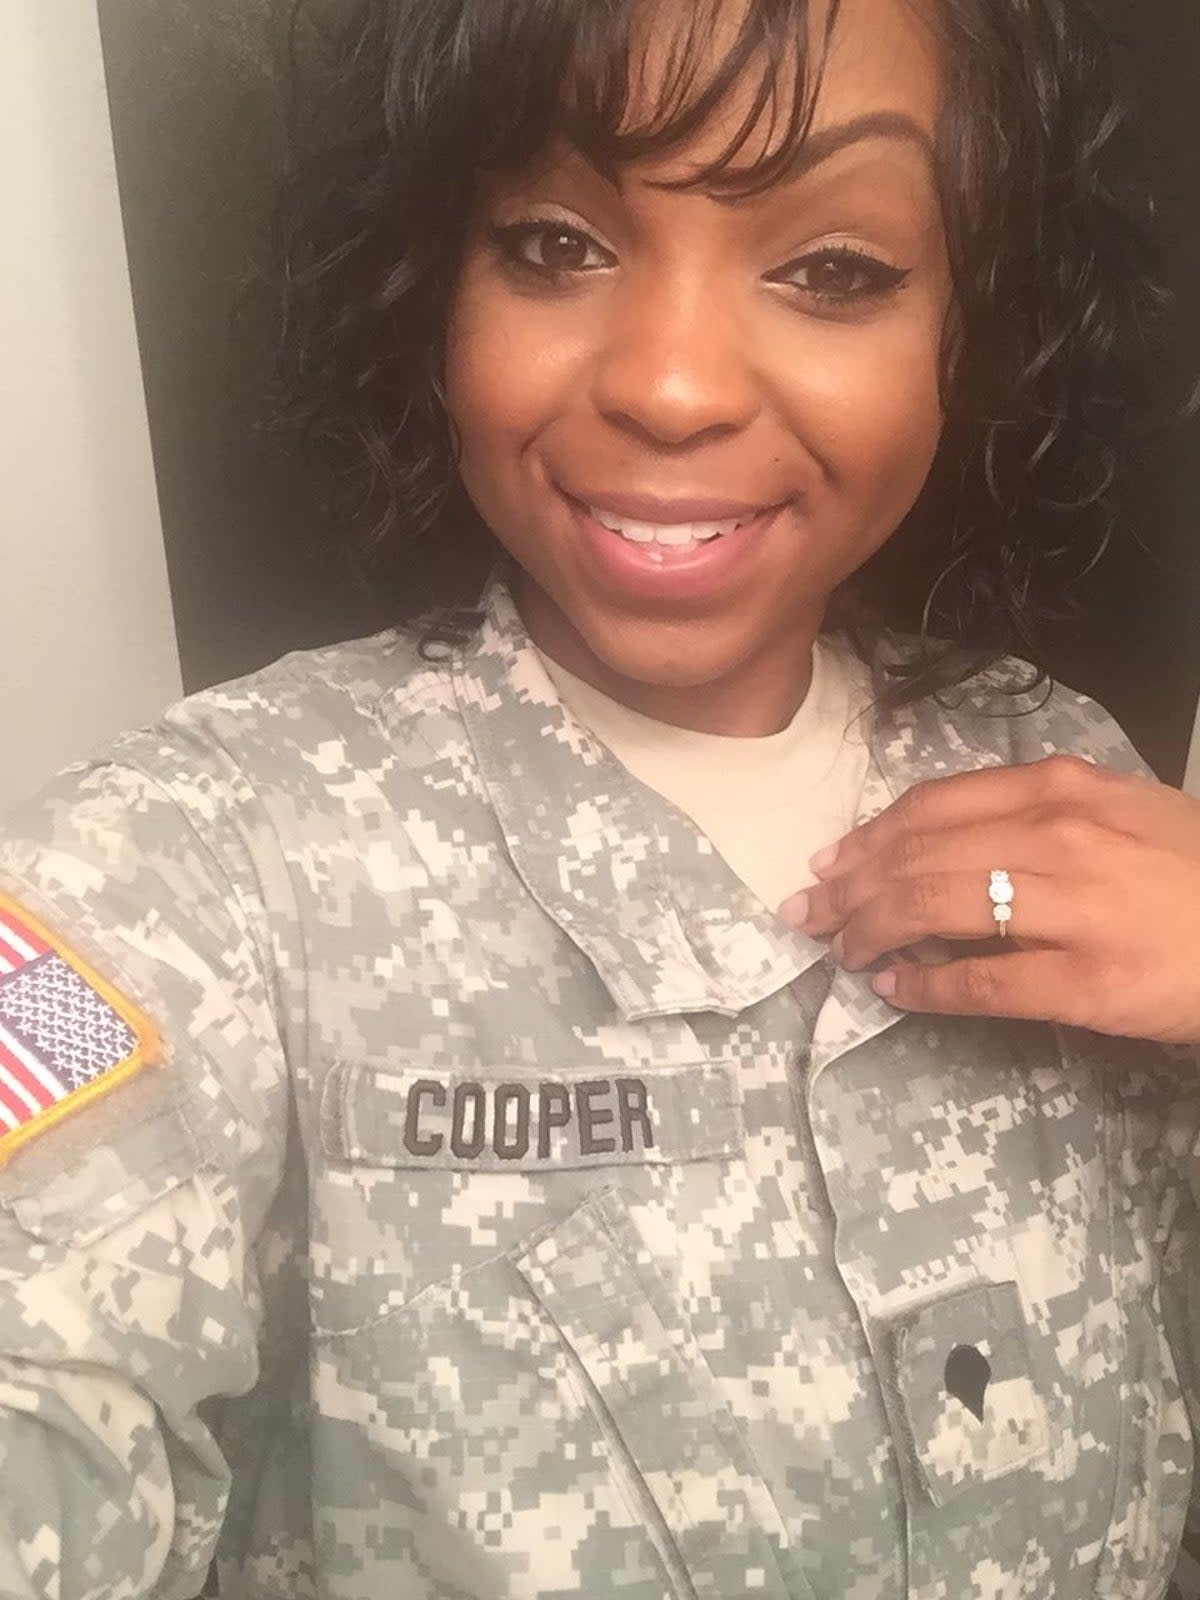 Soldier Meiziaha Cooper and her family were found dead on 15 November (Meiziaha Cooper / Facebook)